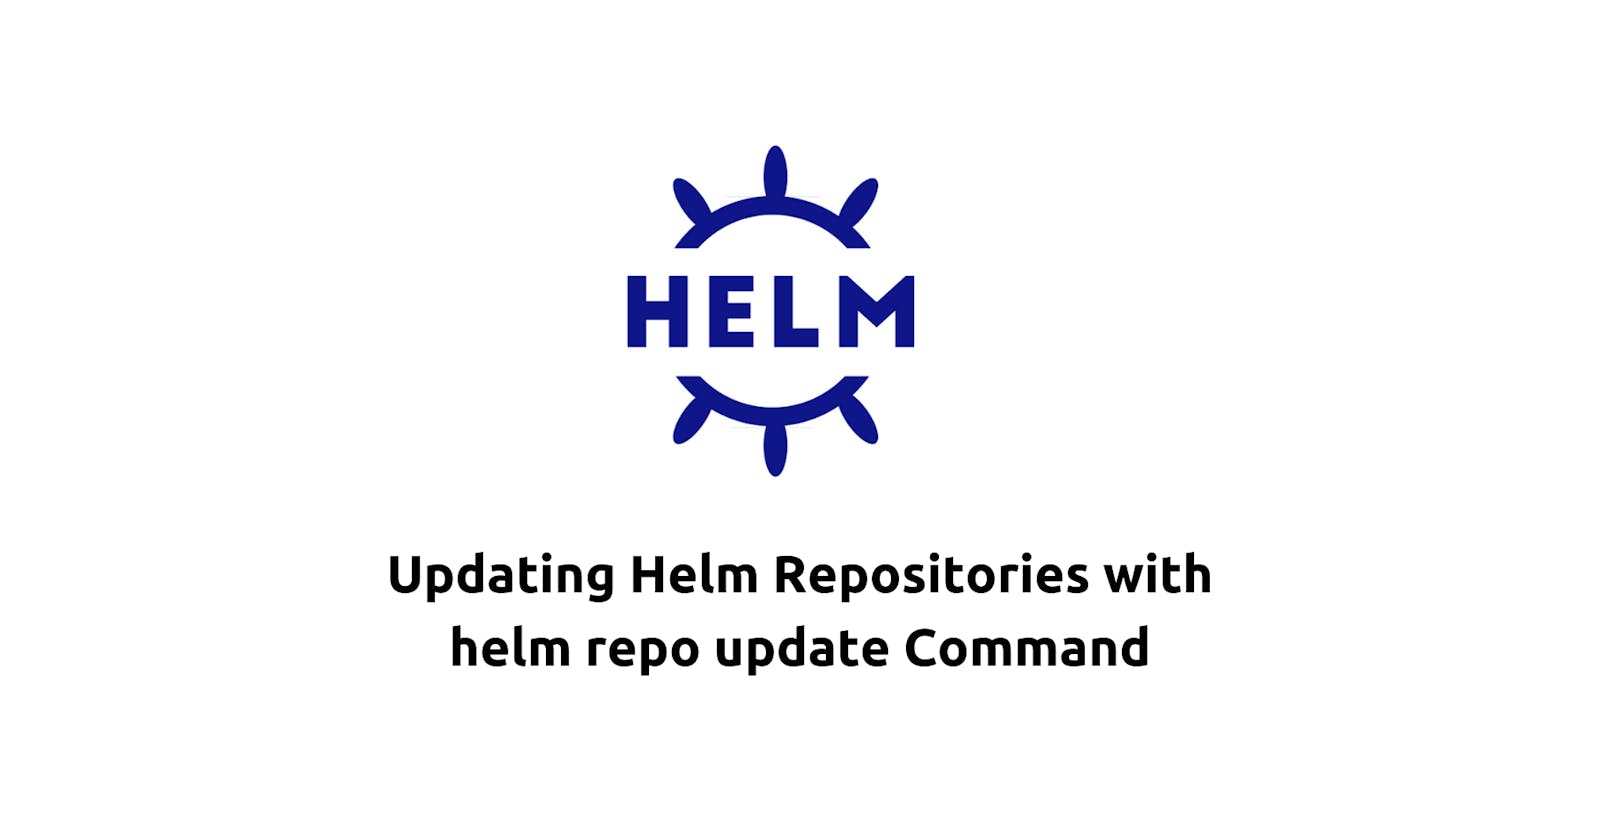 Updating Helm Repositories with helm repo update Command